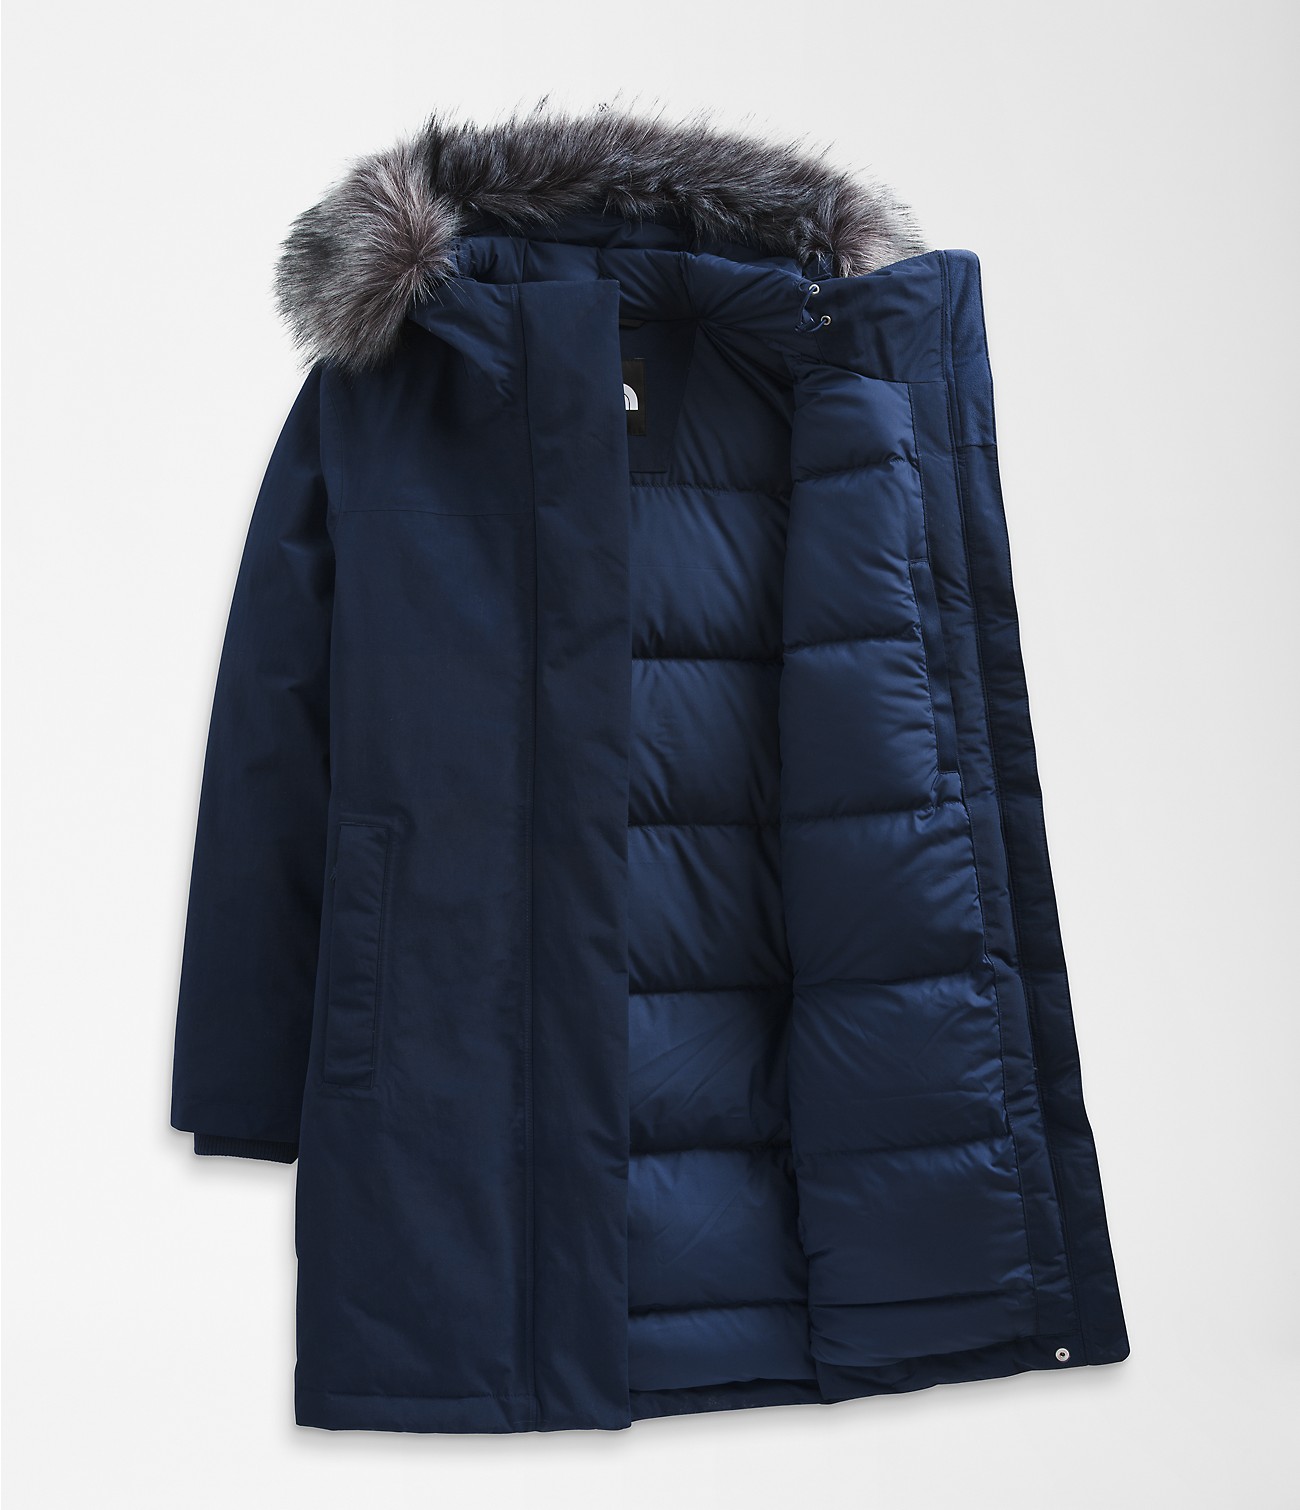 Unlock Wilderness' choice in the Patagonia Vs North Face comparison, the Arctic Parka by The North Face